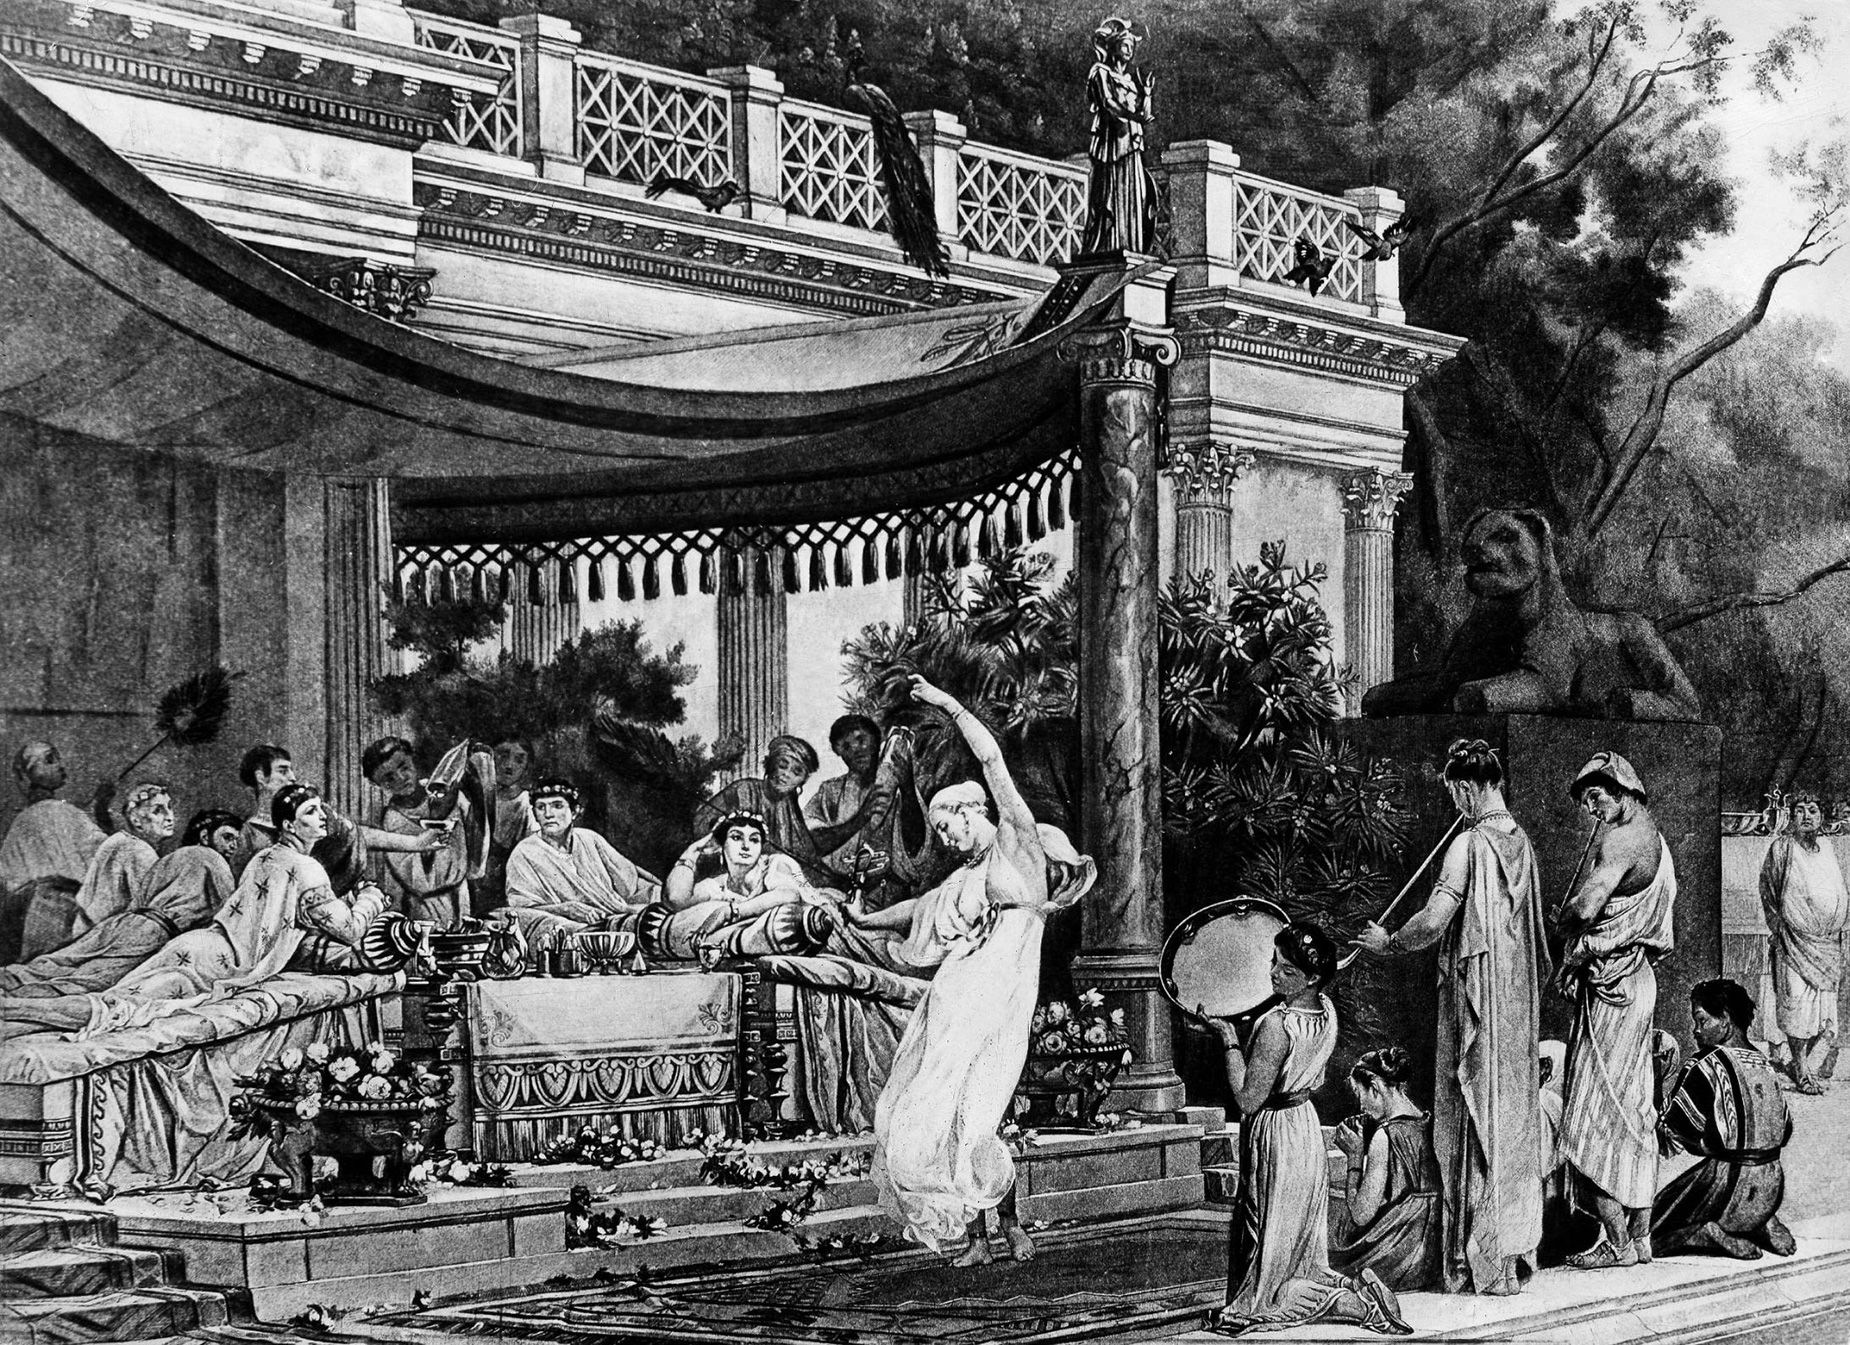 An engraving of a banquet at the house of Lucius Licinius Lucullus from around 80 B.C.